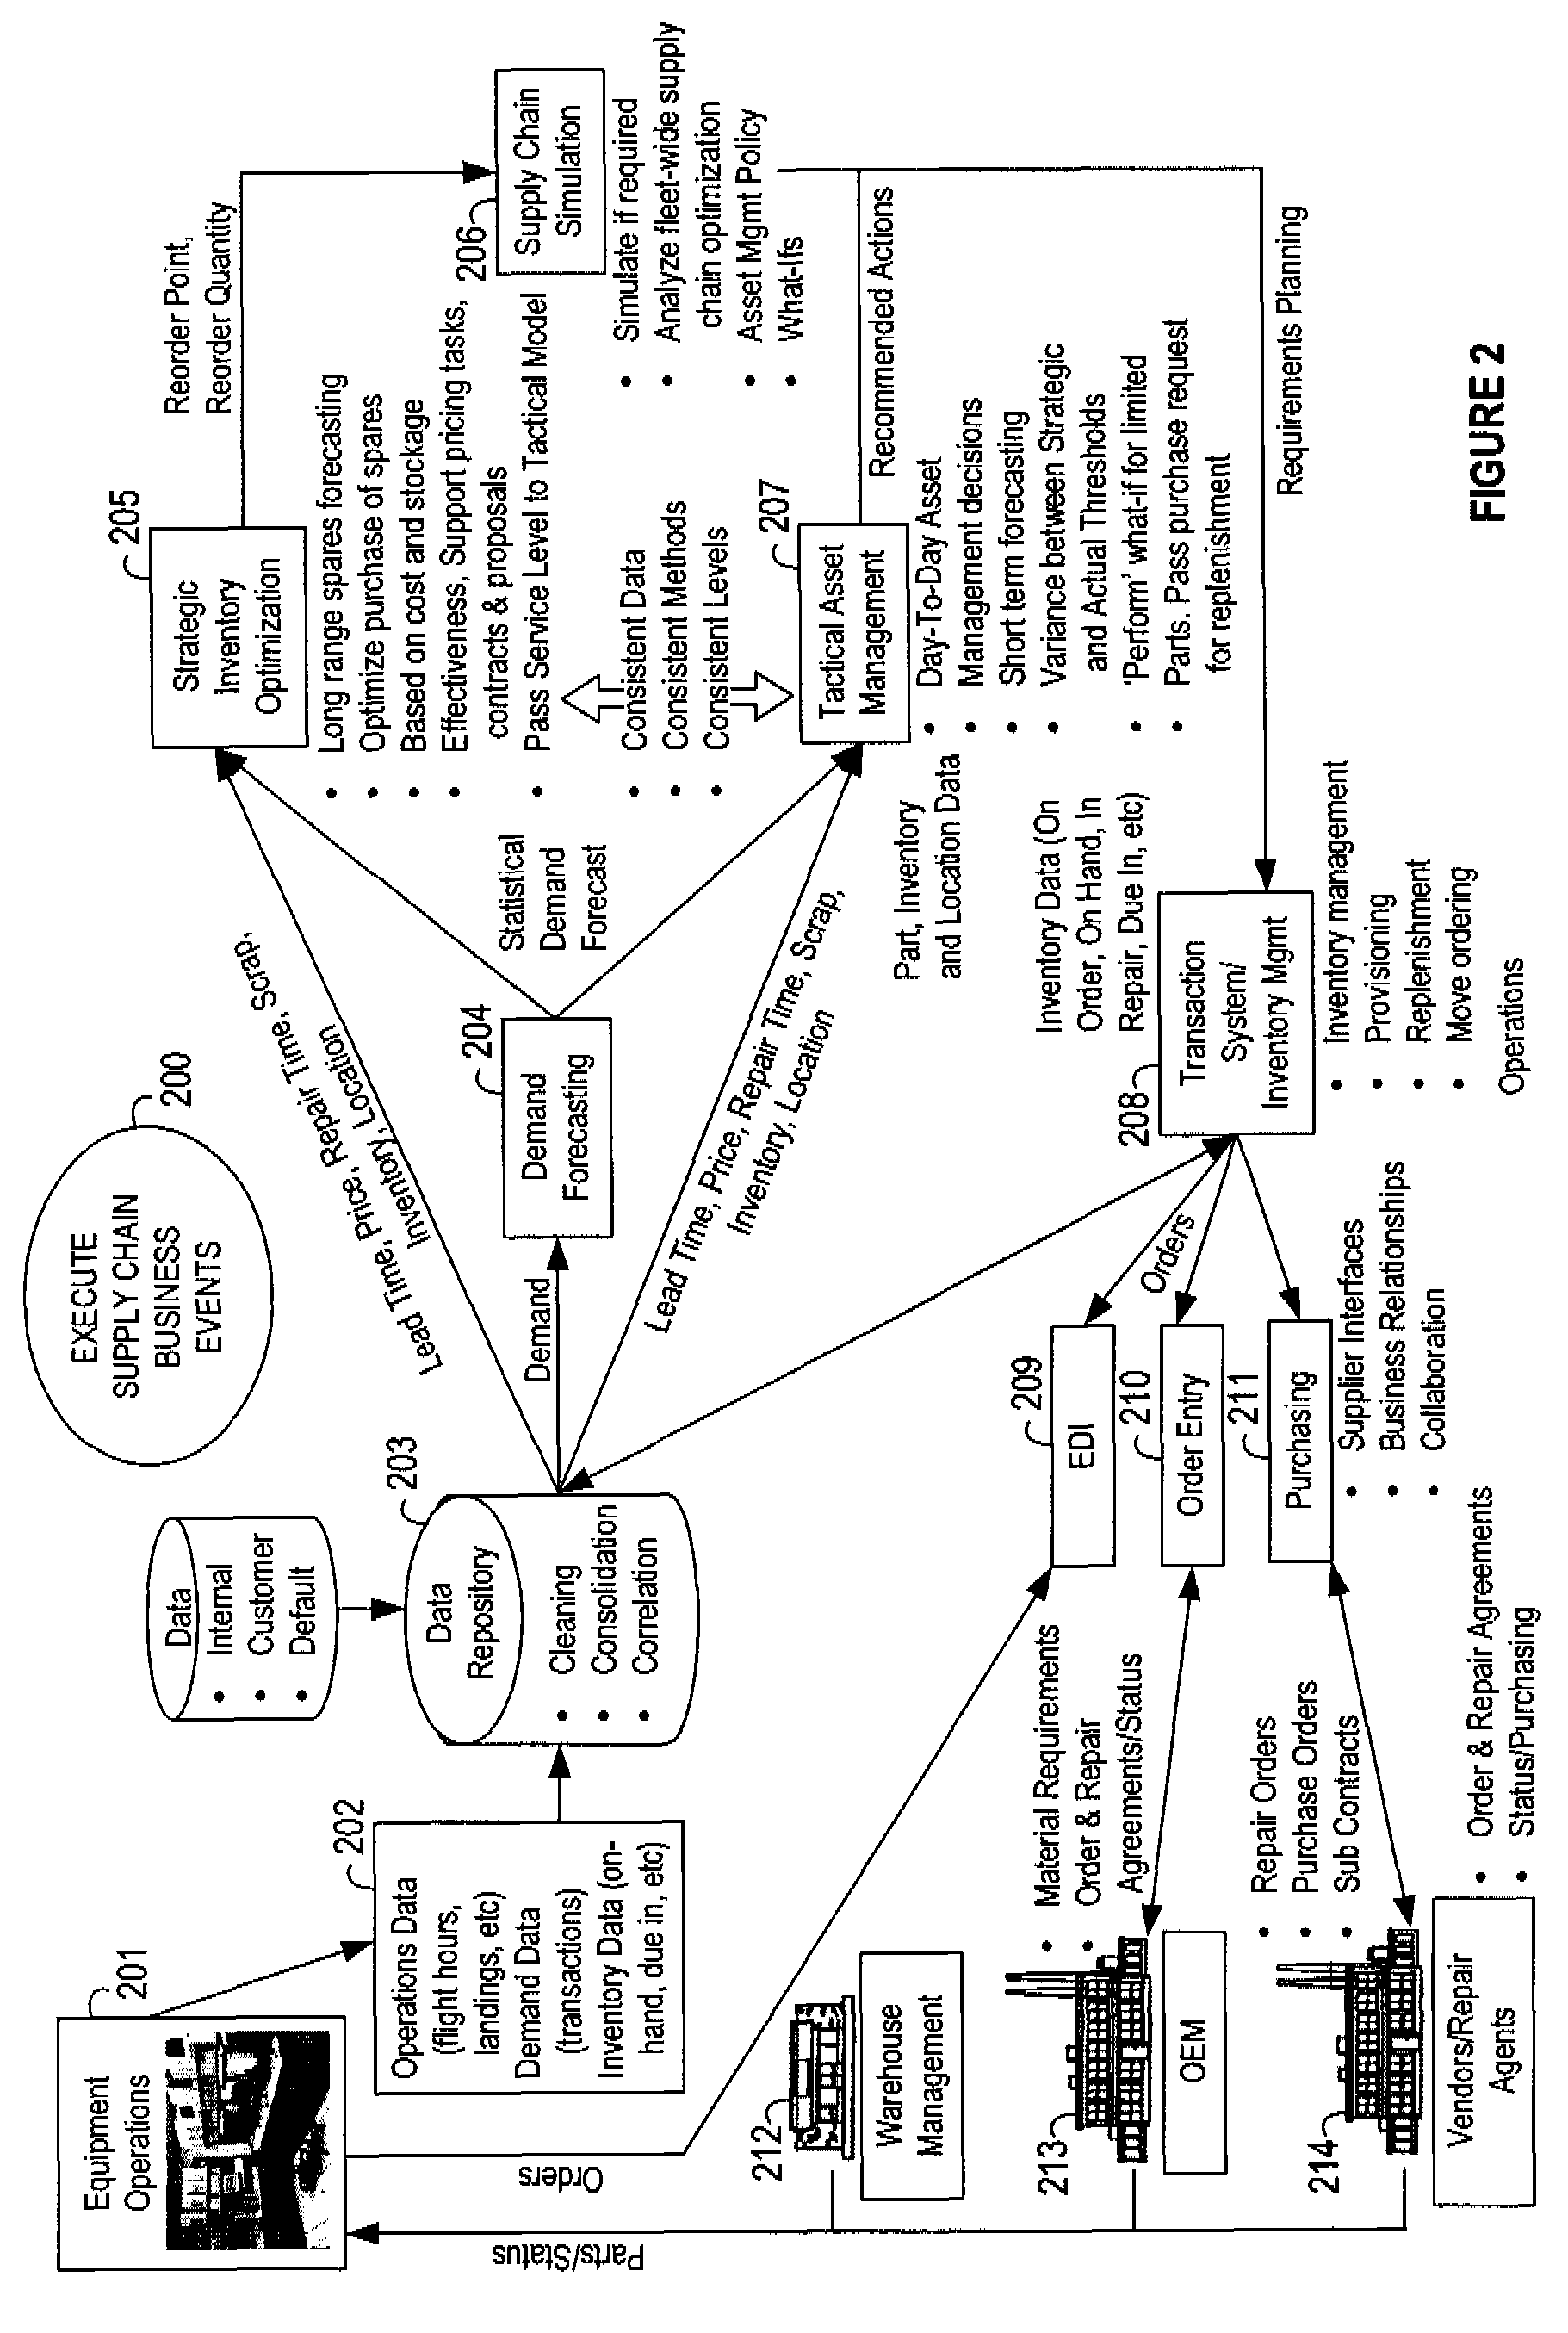 Methods, systems, and computer integrated program products for supply chain management